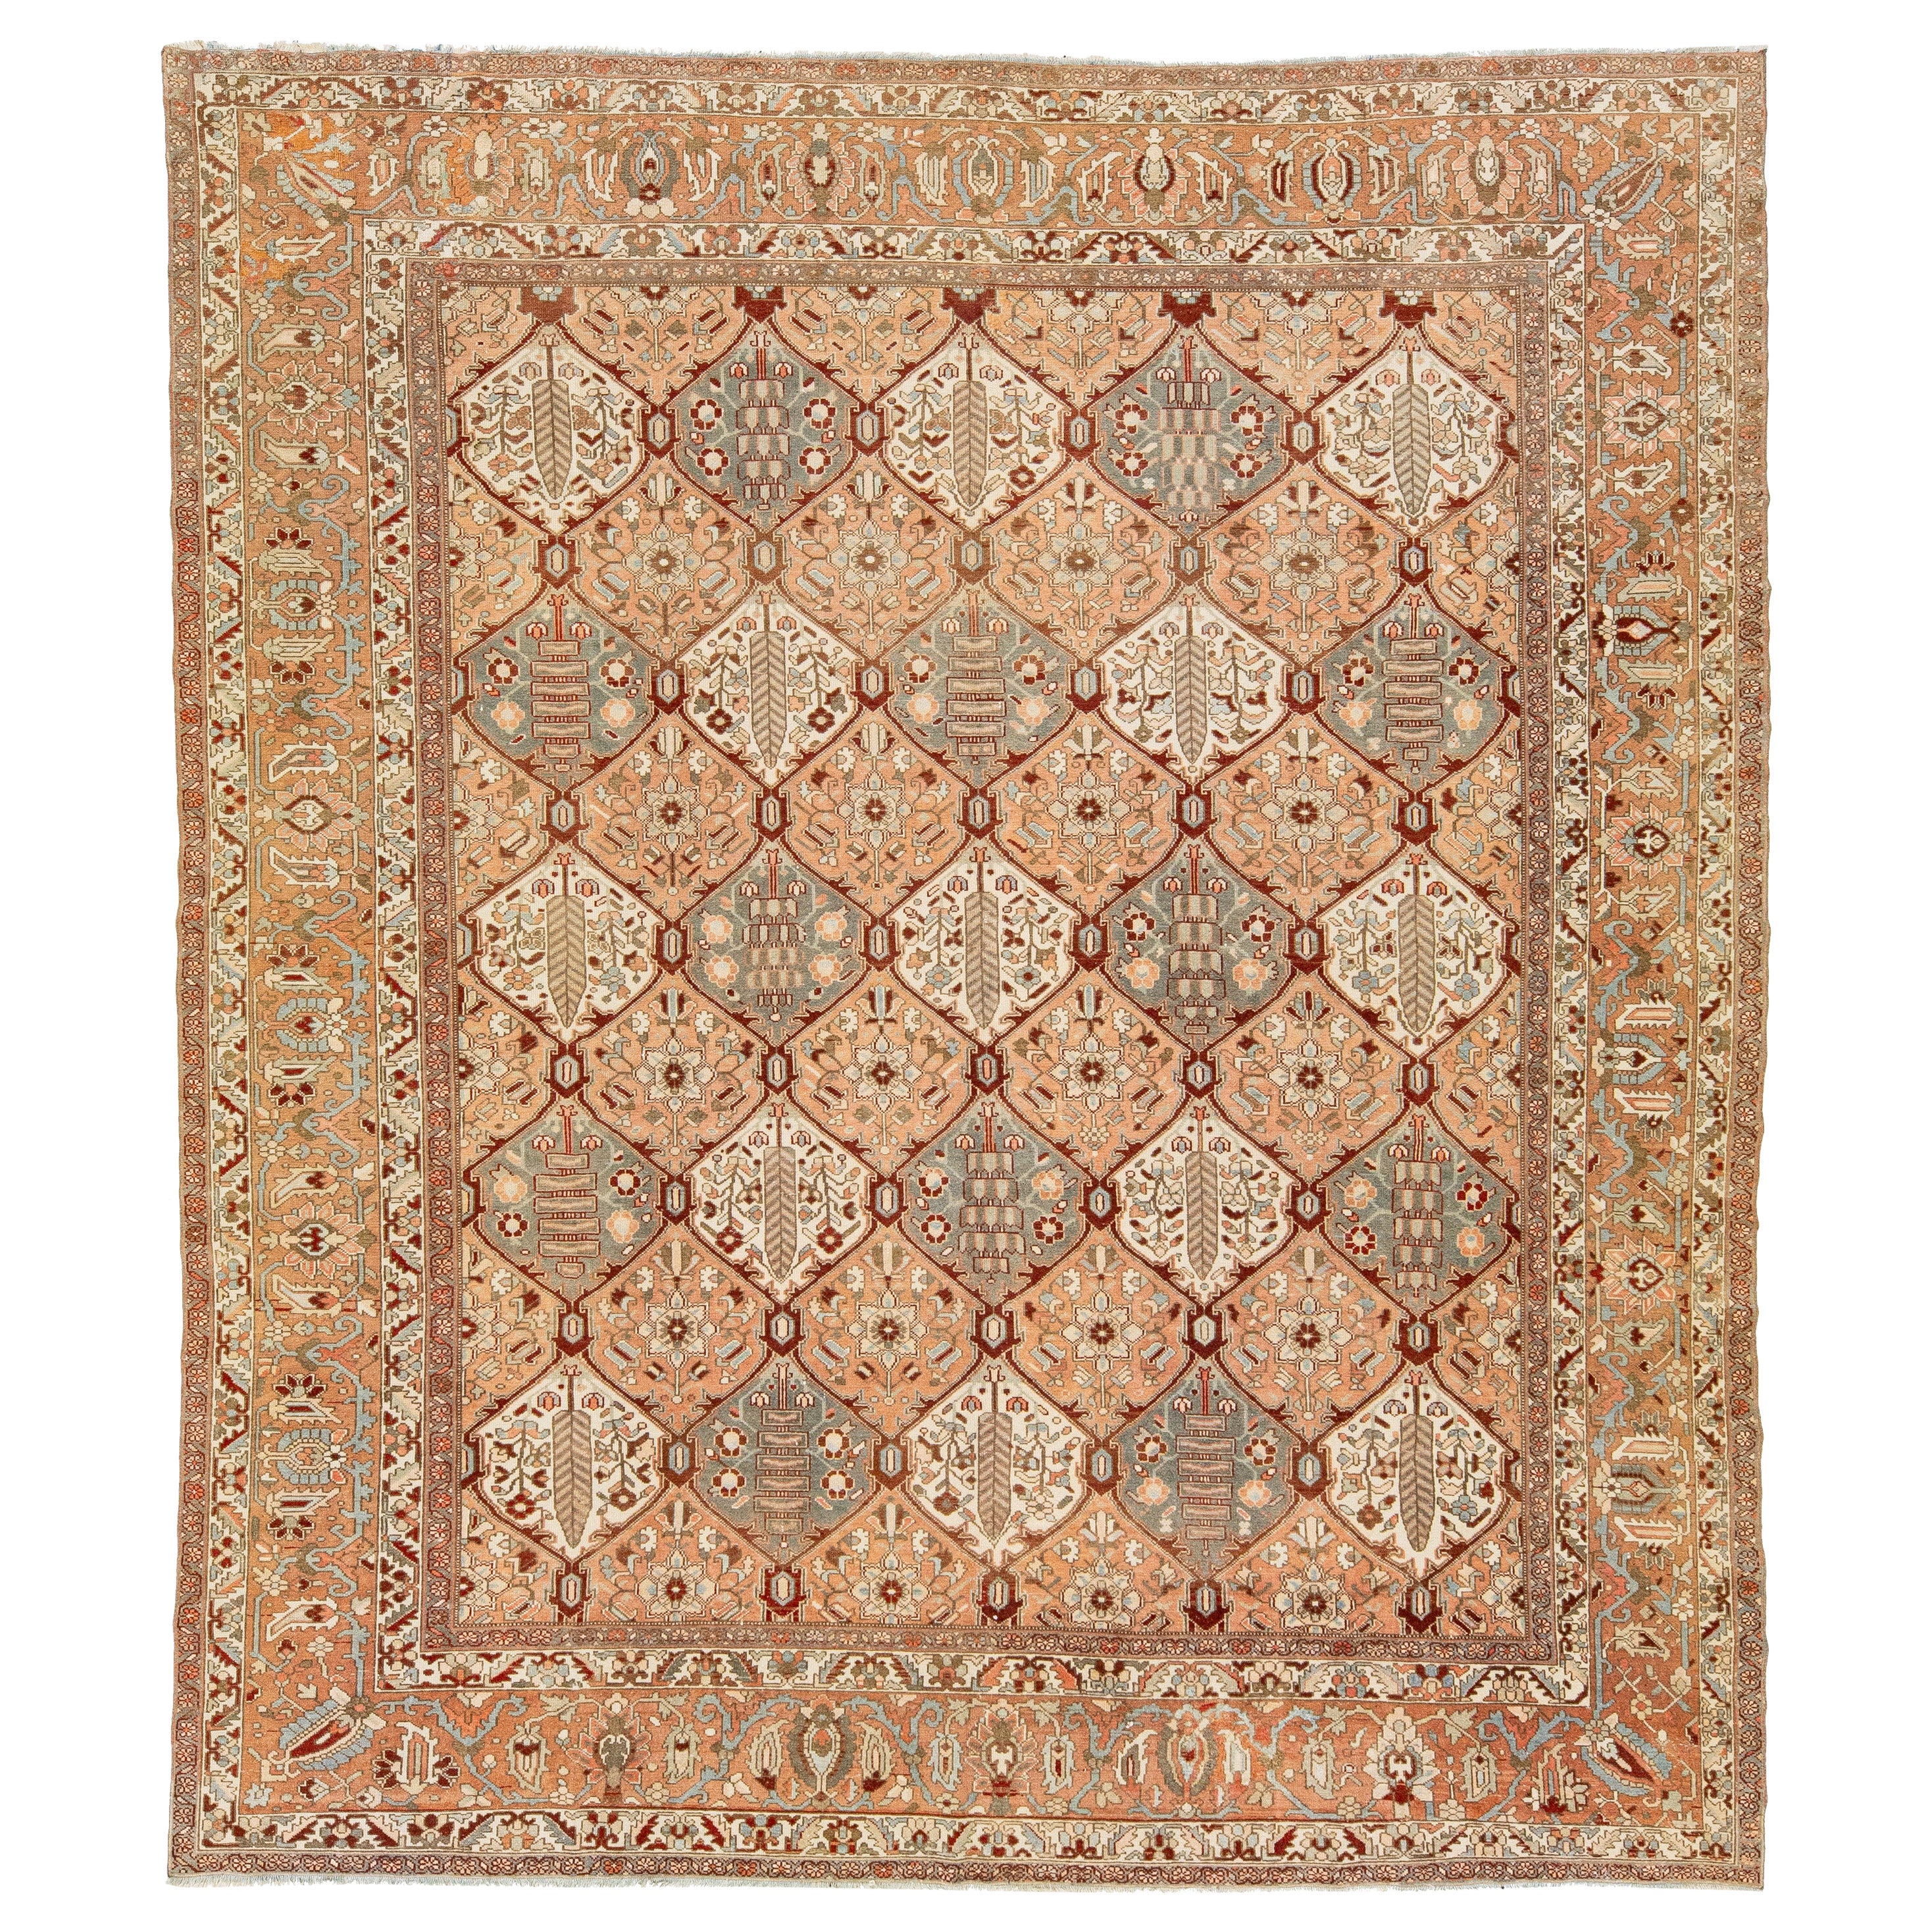 1920s Persian Bakhtiari Peach Wool Rug Handmade With Allover Geometric Pattern For Sale